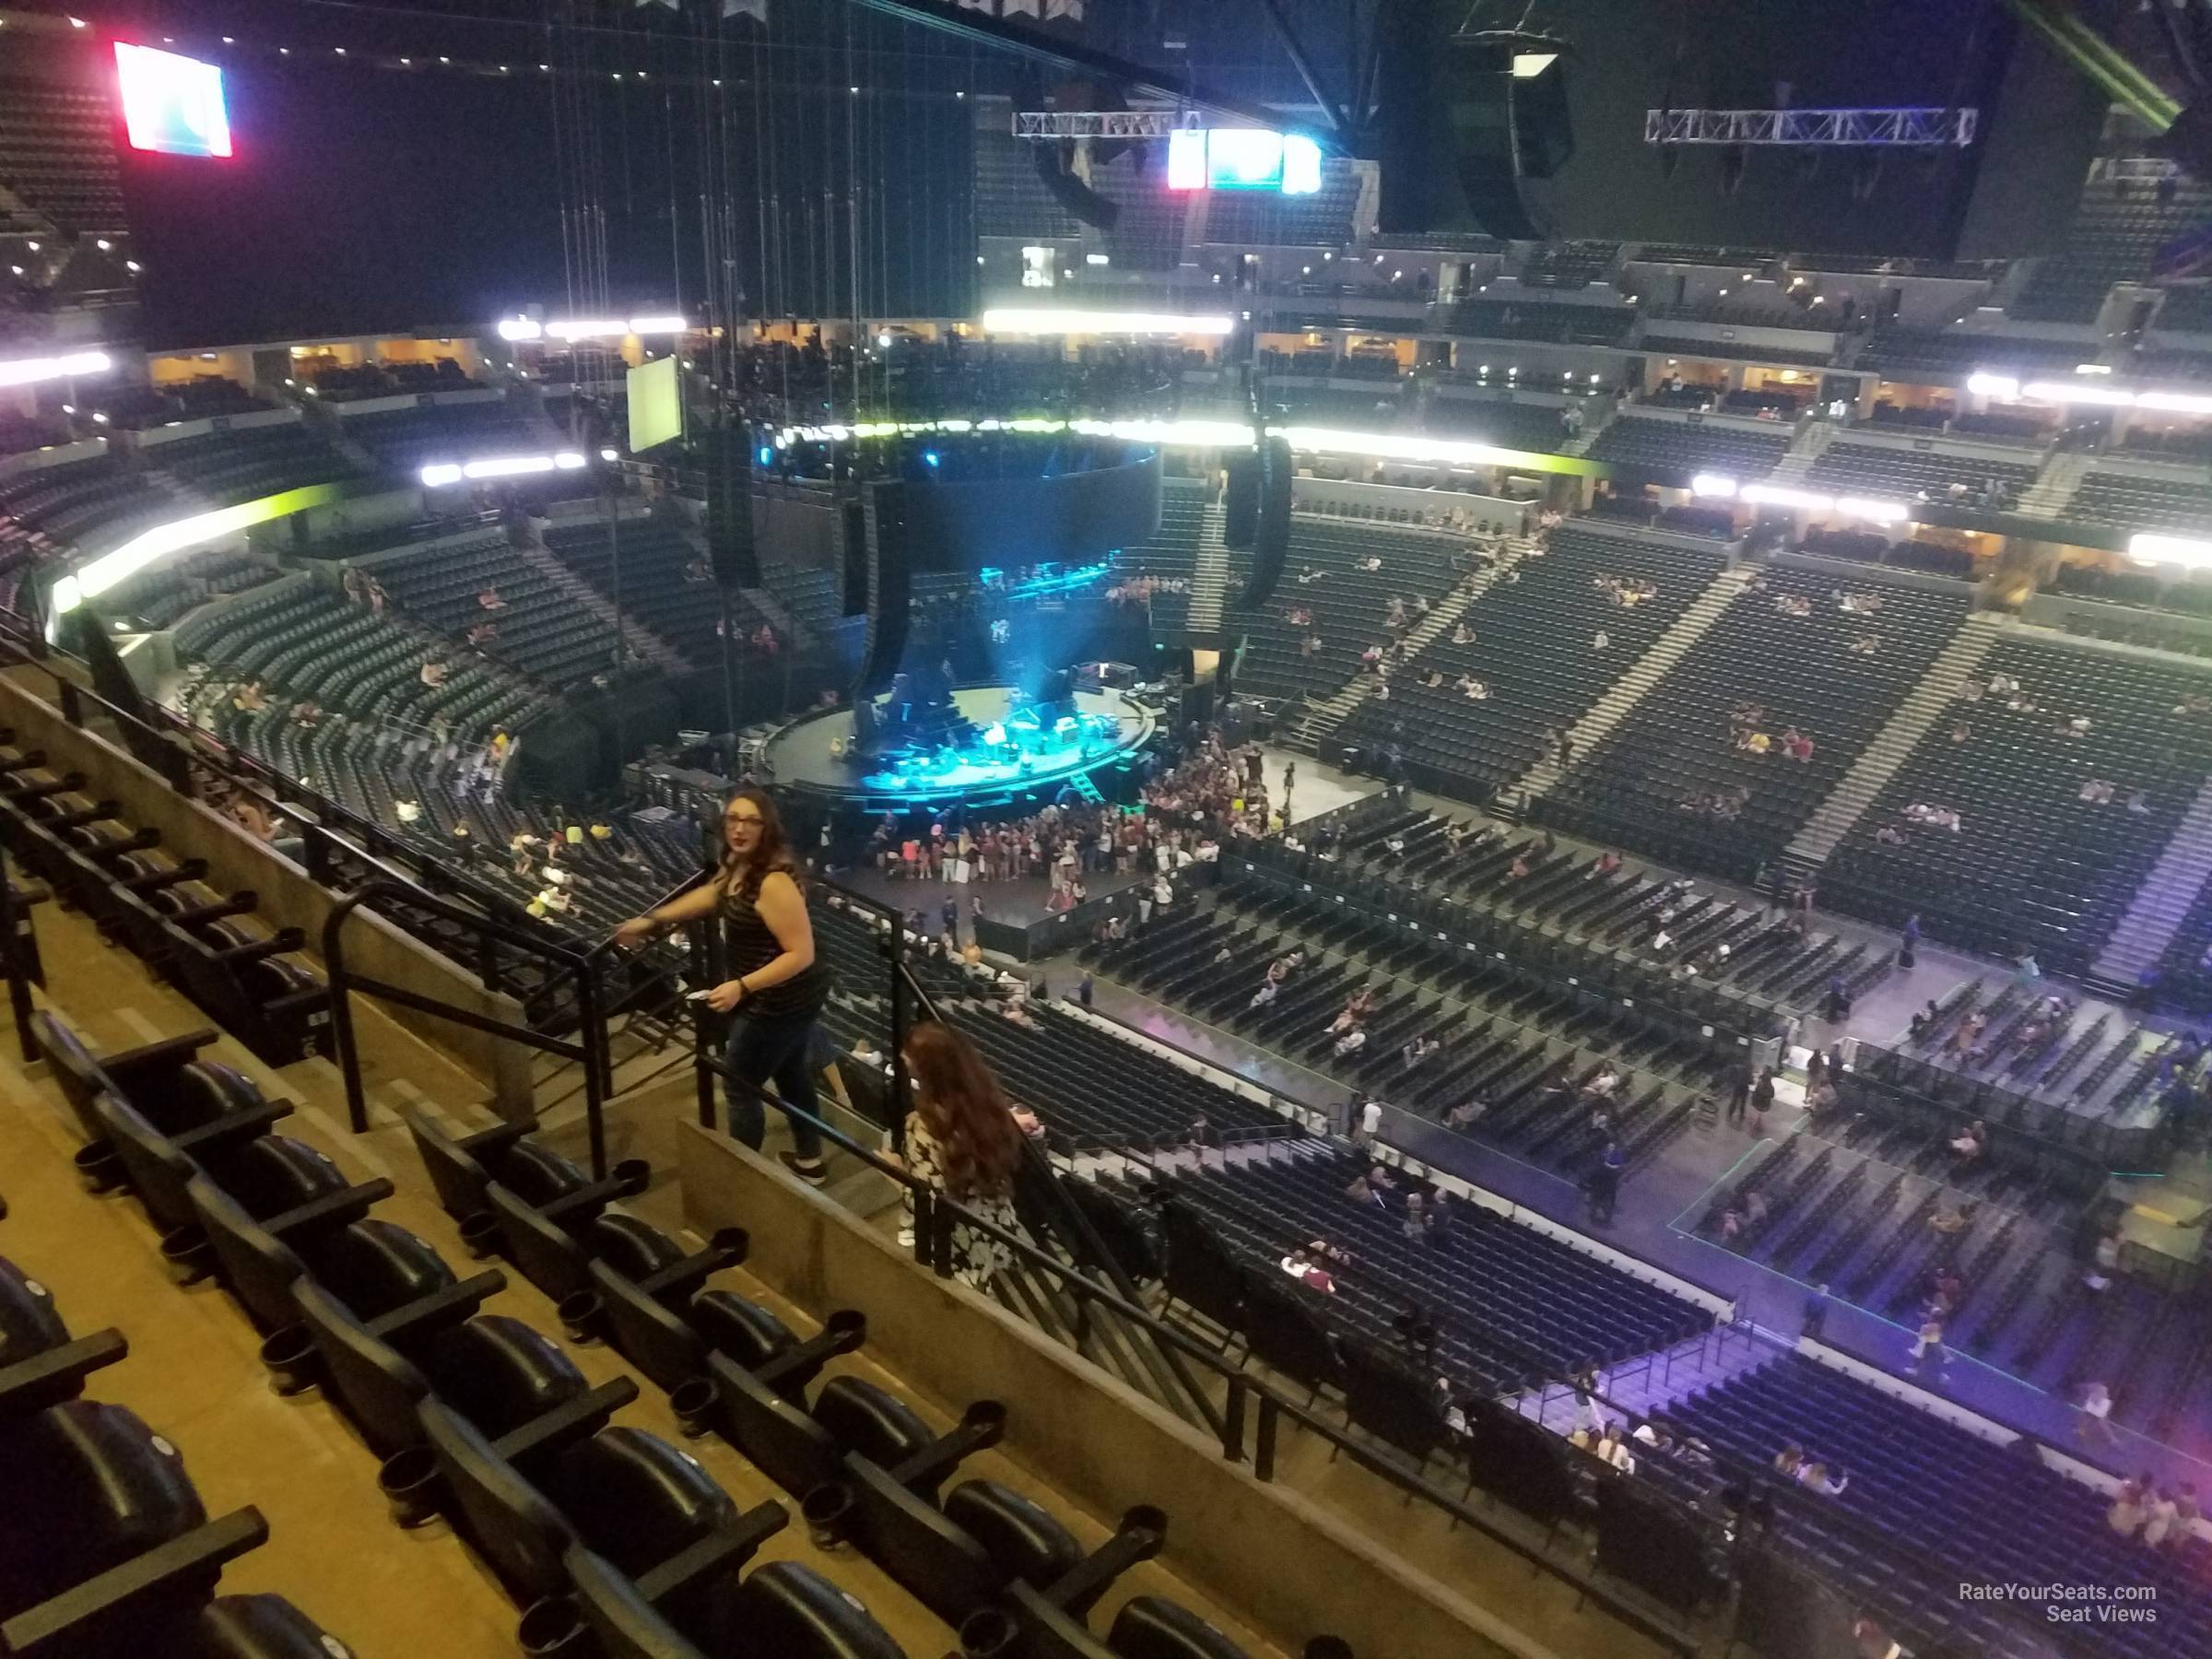 Section 340 at Ball Arena for Concerts